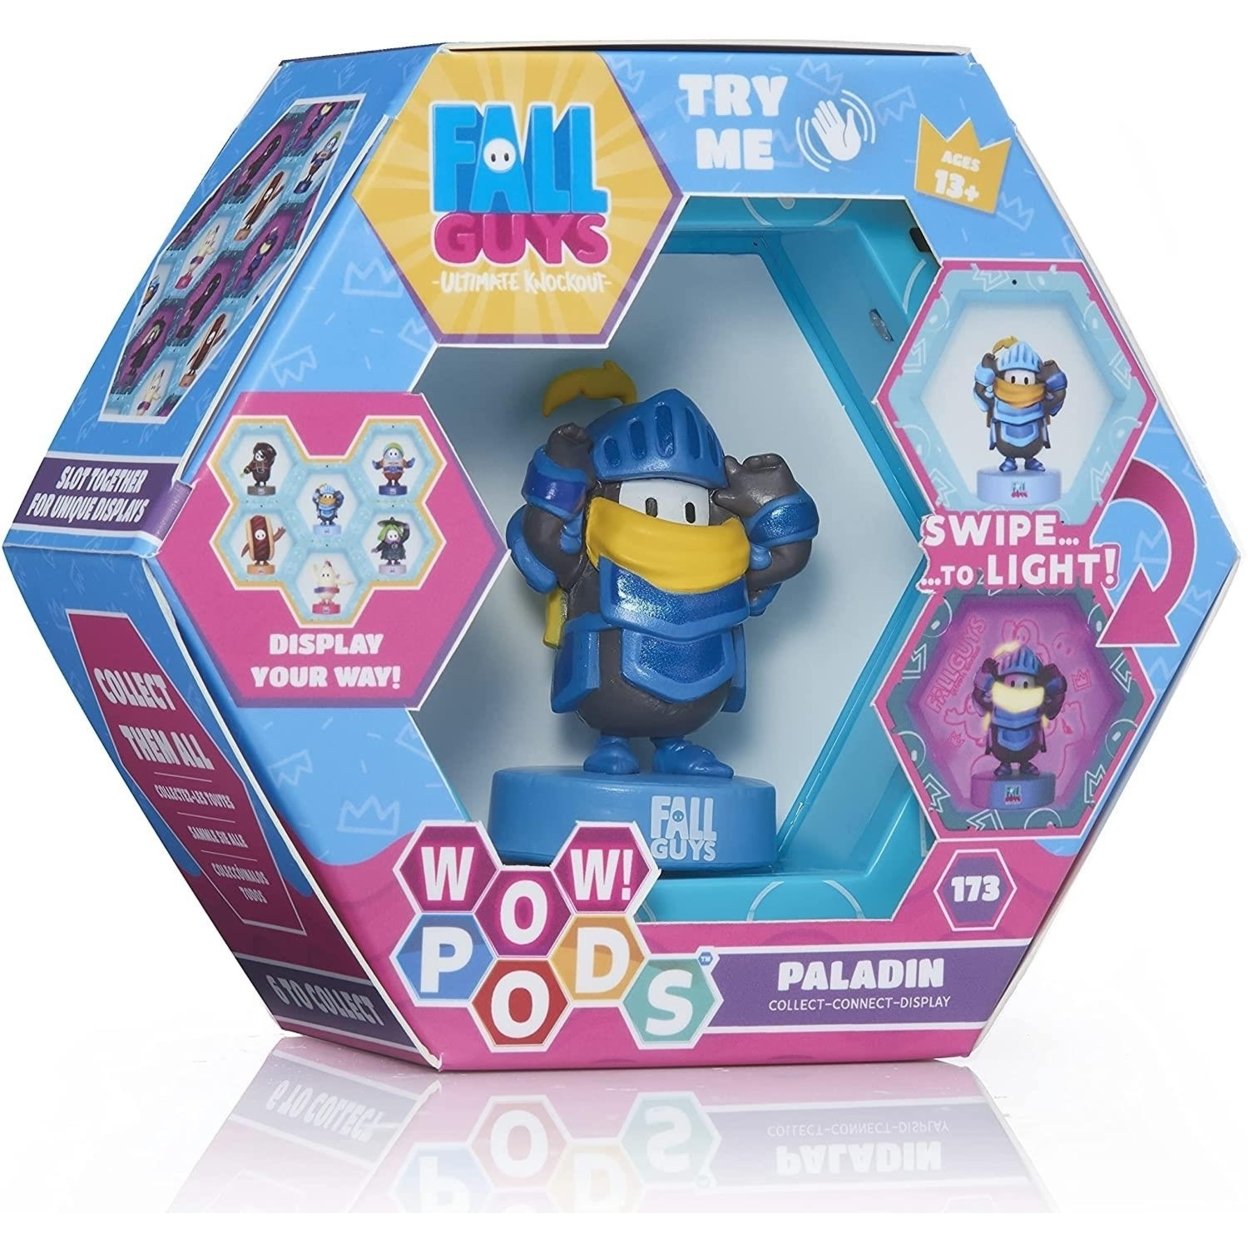 WOW Pods Fall Guys Paladin Knight Swipe Light-Up Figure Connect For Display